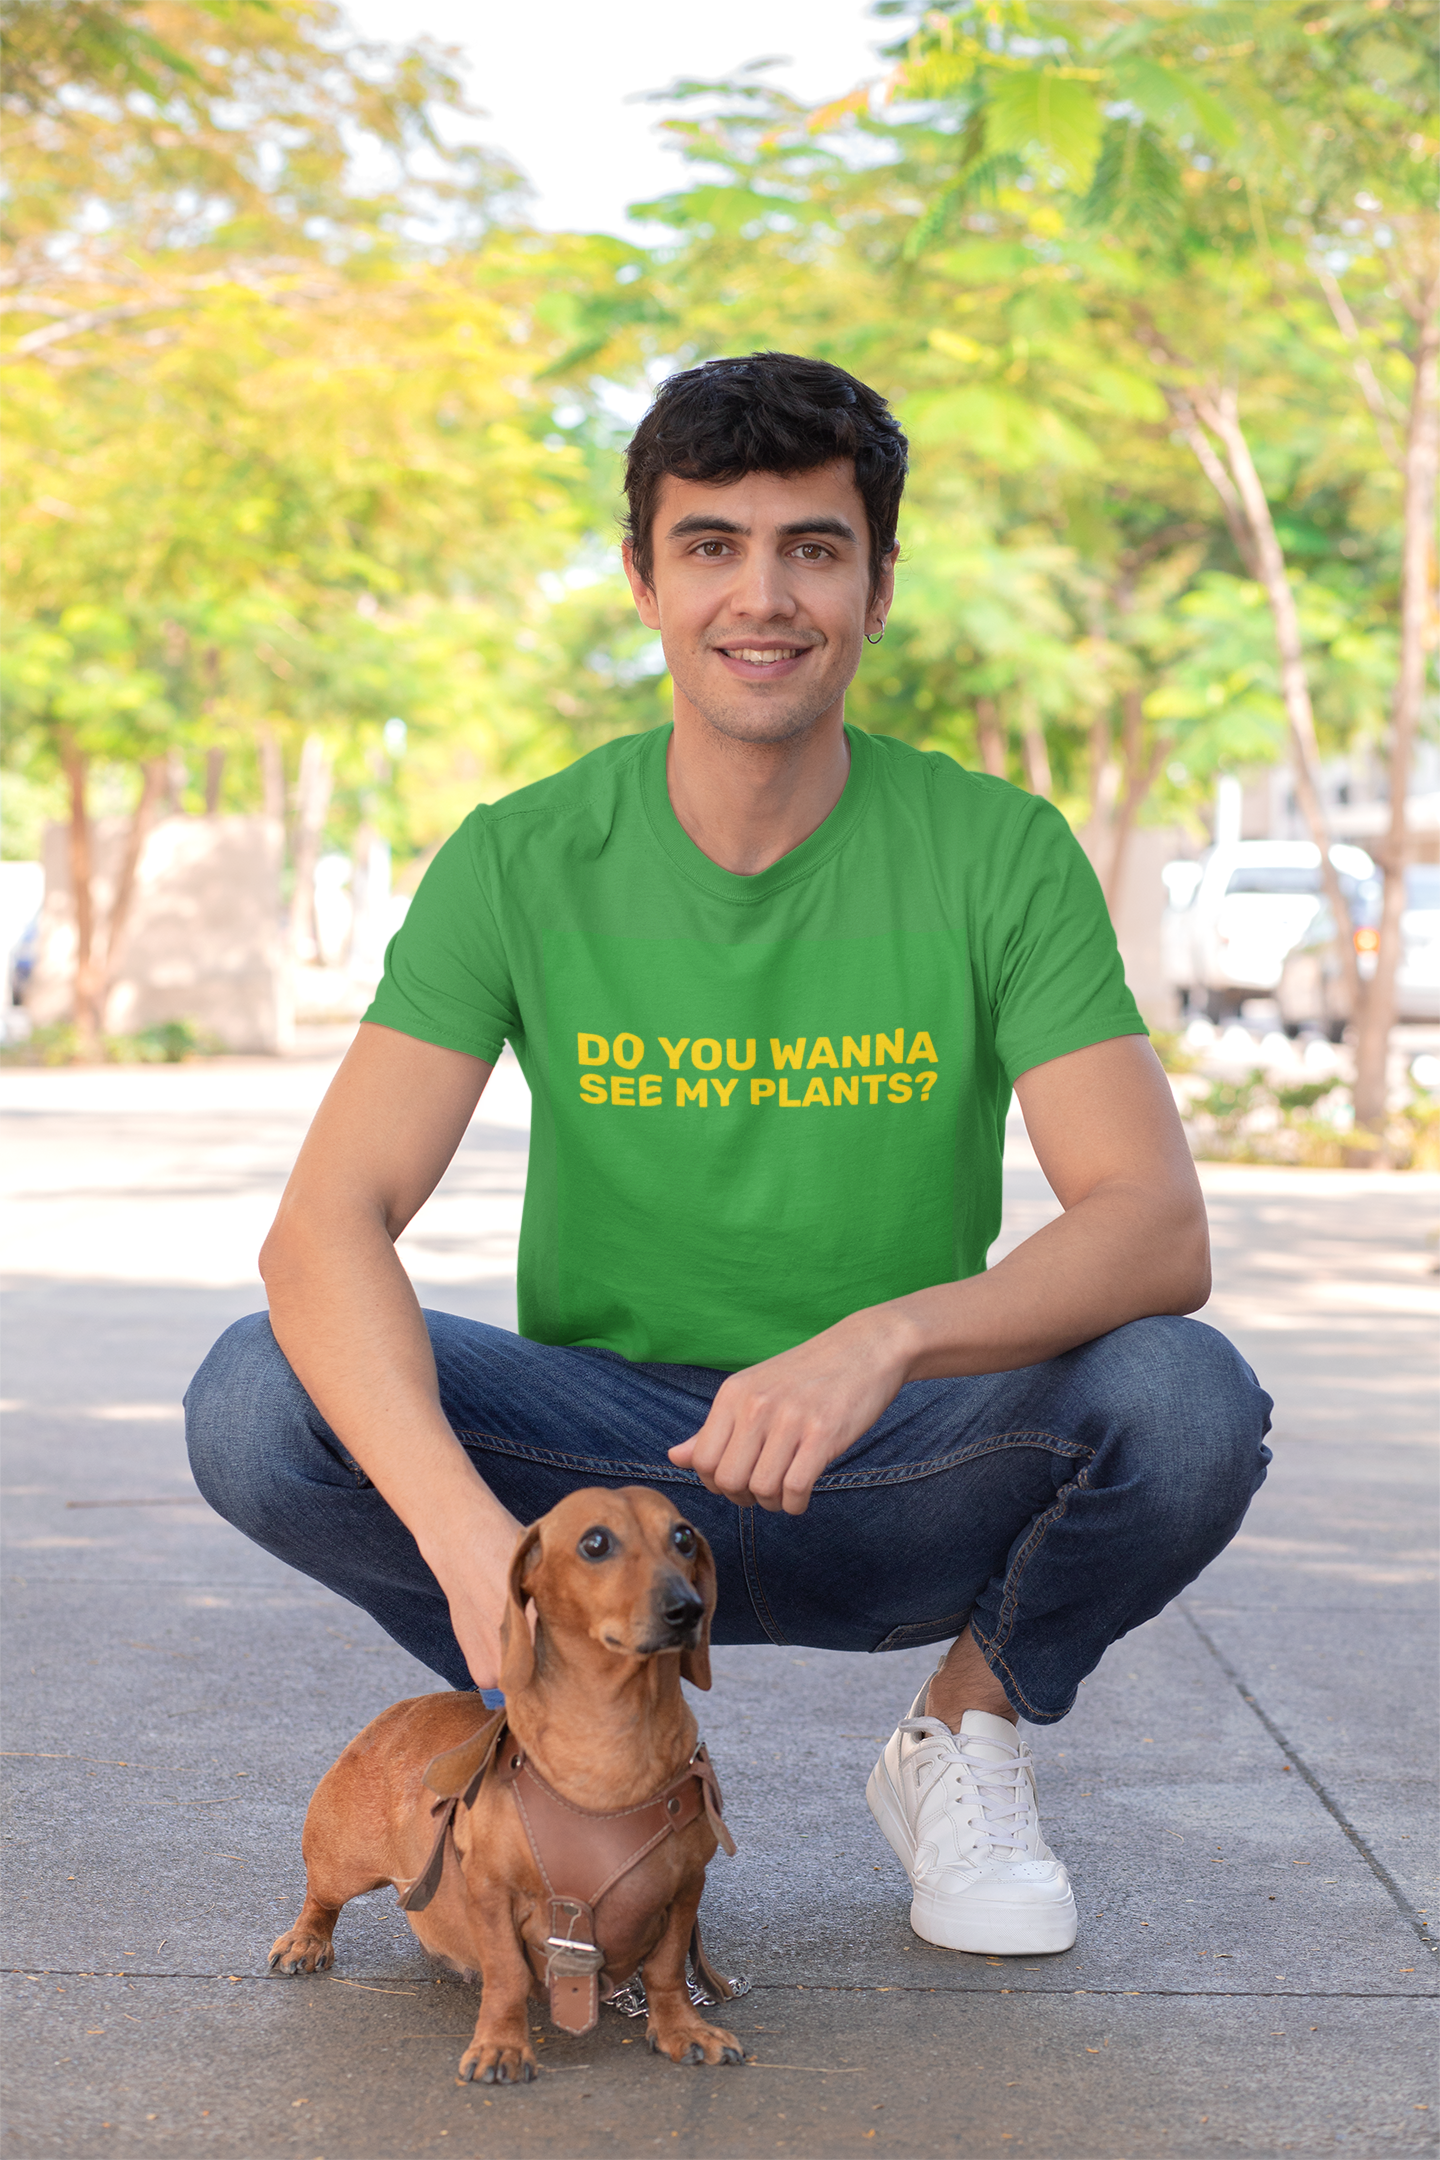 t-shirt-mockup-of-a-man-on-the-street-with-his-dog-30685 (1).png